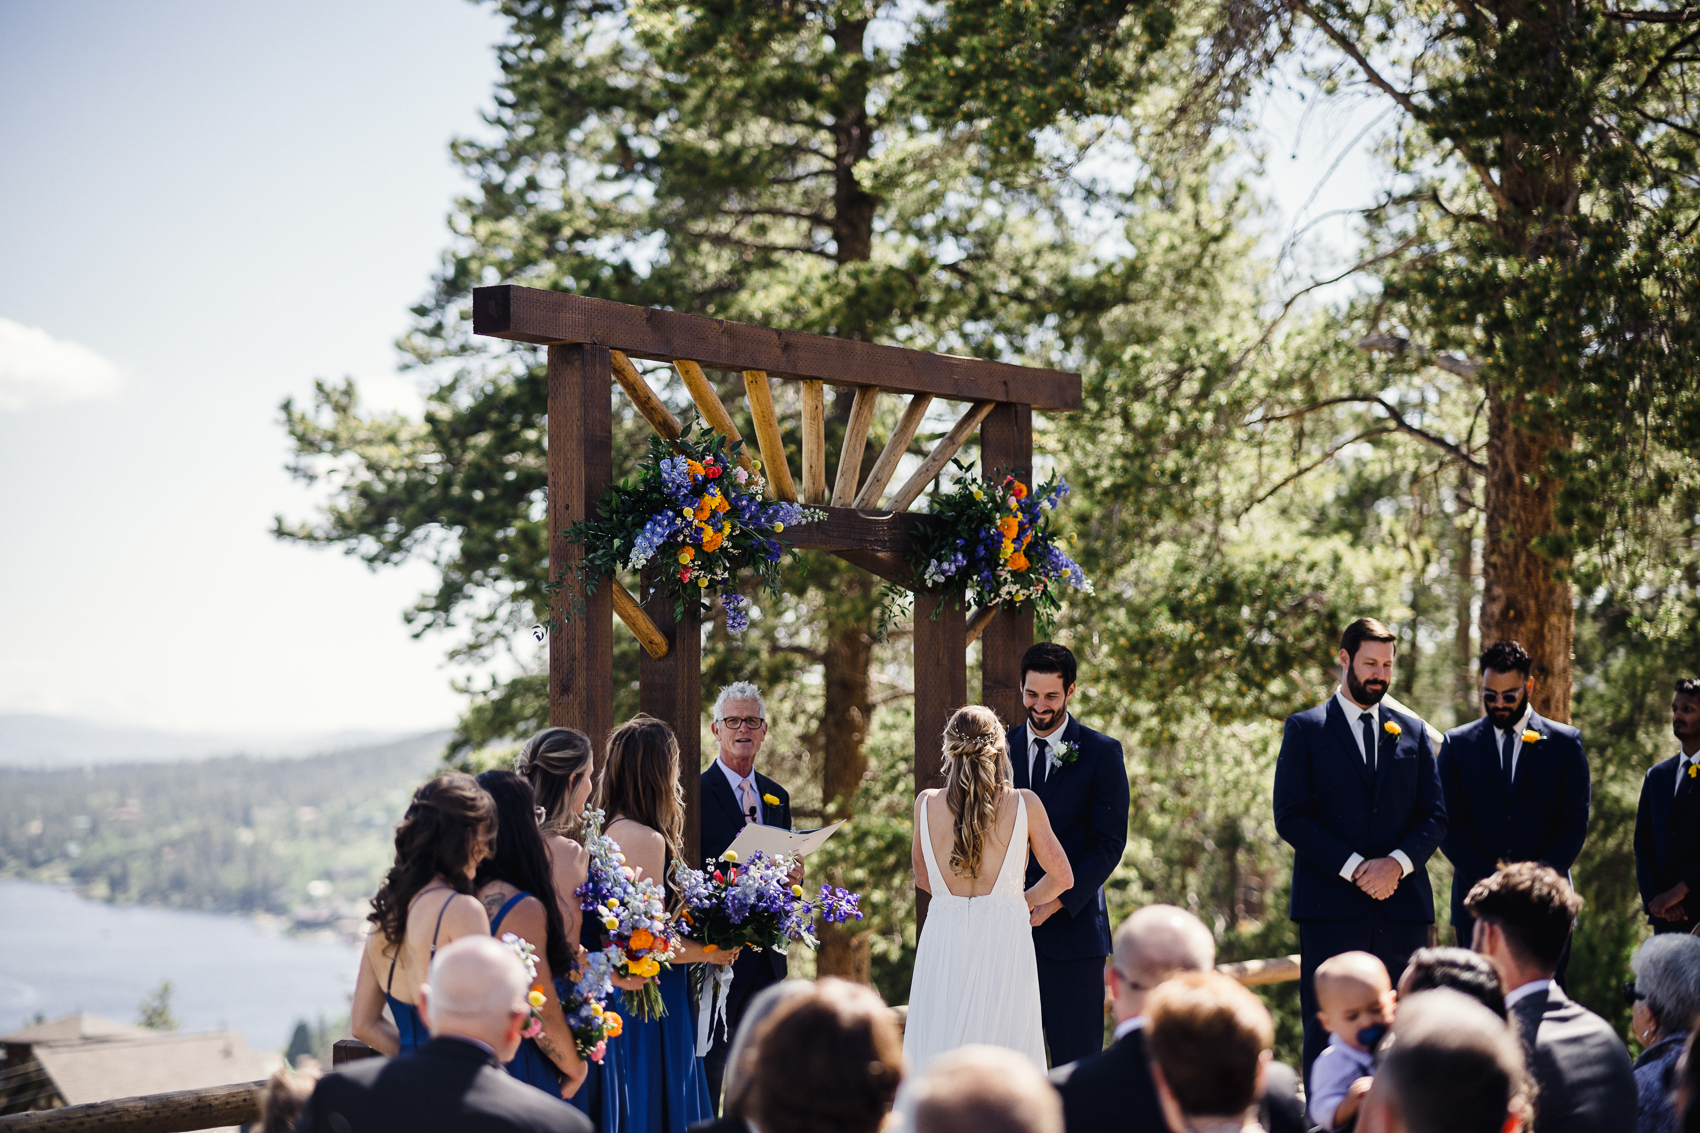 An outdoor wedding ceremony in front of a stunning mountain backdrop at their Grand Lake Lodge wedding.